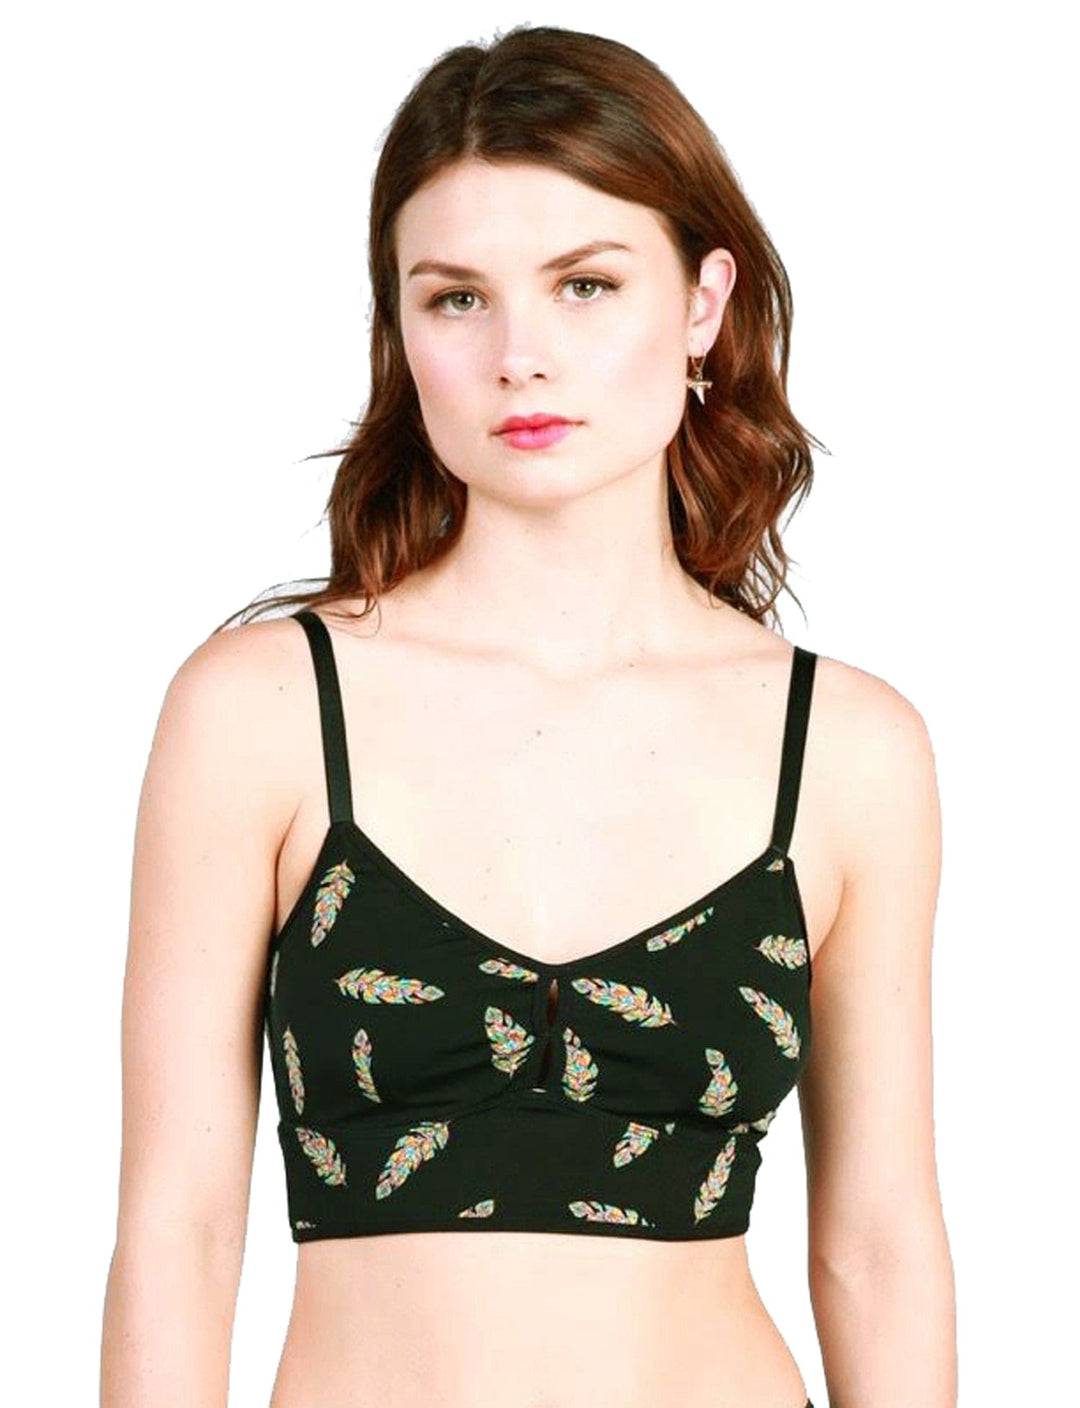 Classic Bralet - Novelty Prints - Cameo Clothing Line